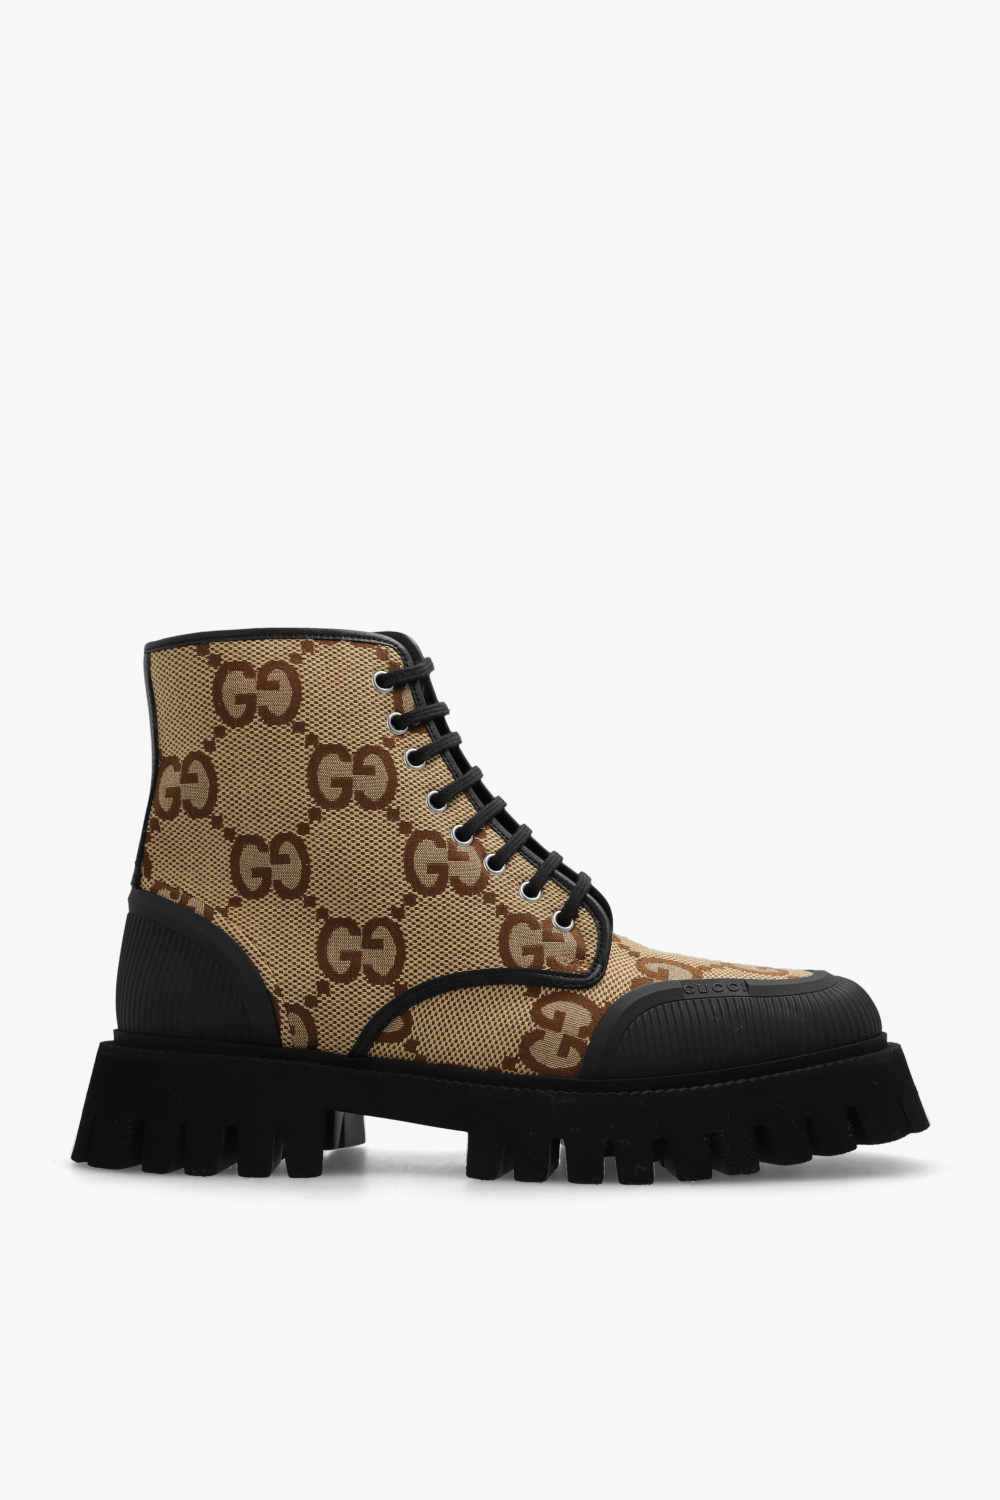 Gucci GUCCI QUILTED WEDGE SHOES